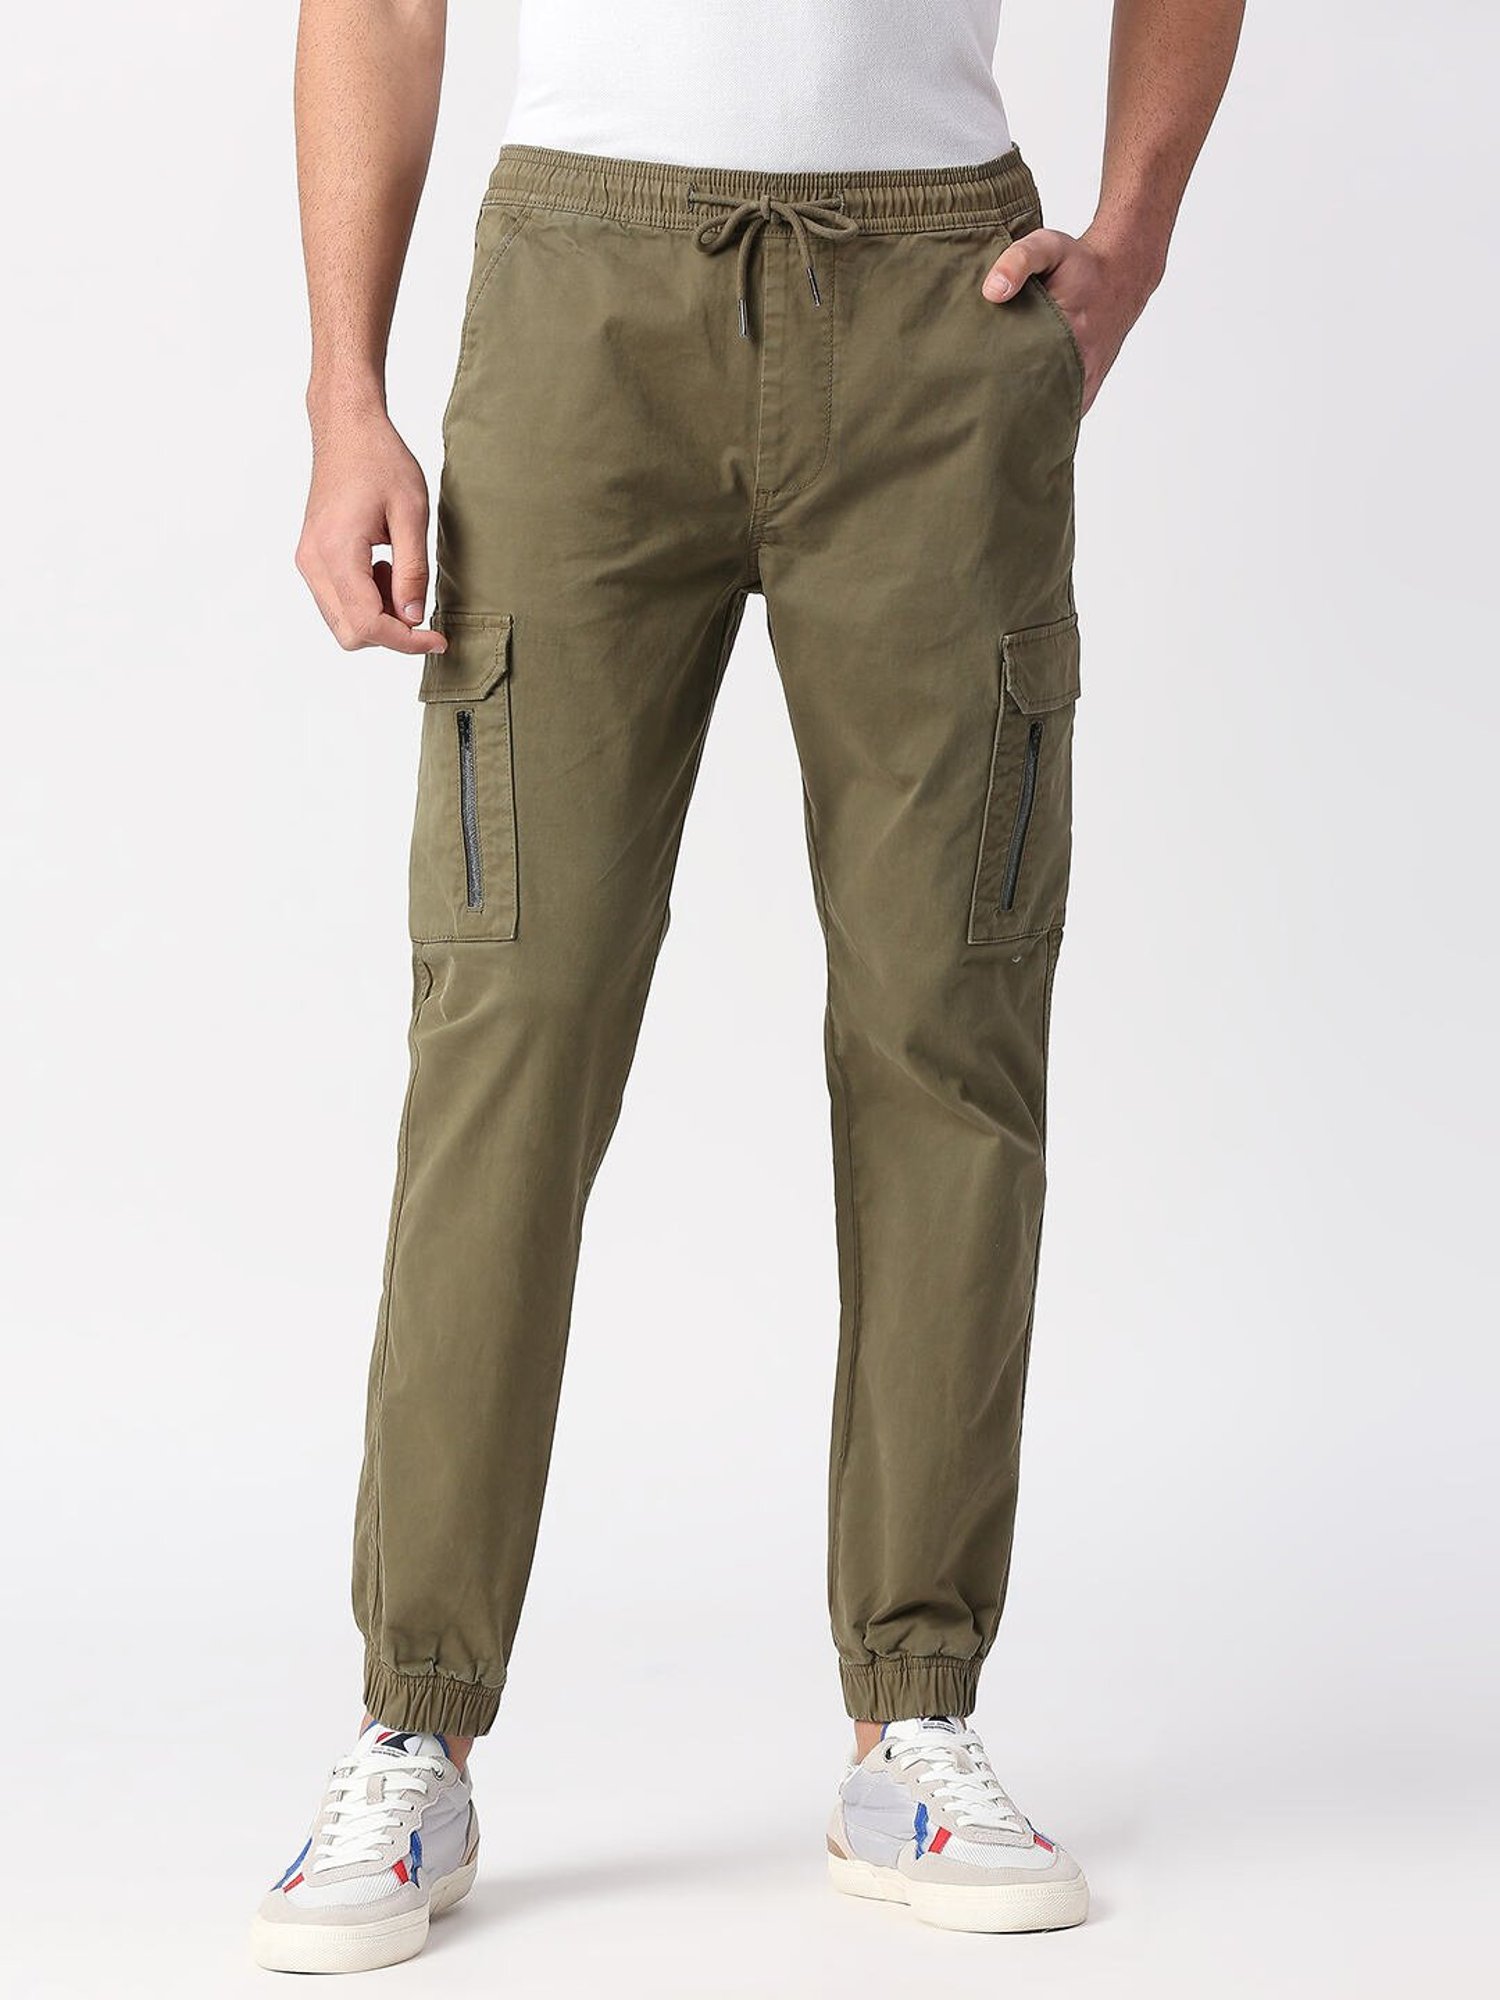 Pepe Jeans Cargos  Buy Pepe Jeans Men Olive Cargo Online  Nykaa Fashion